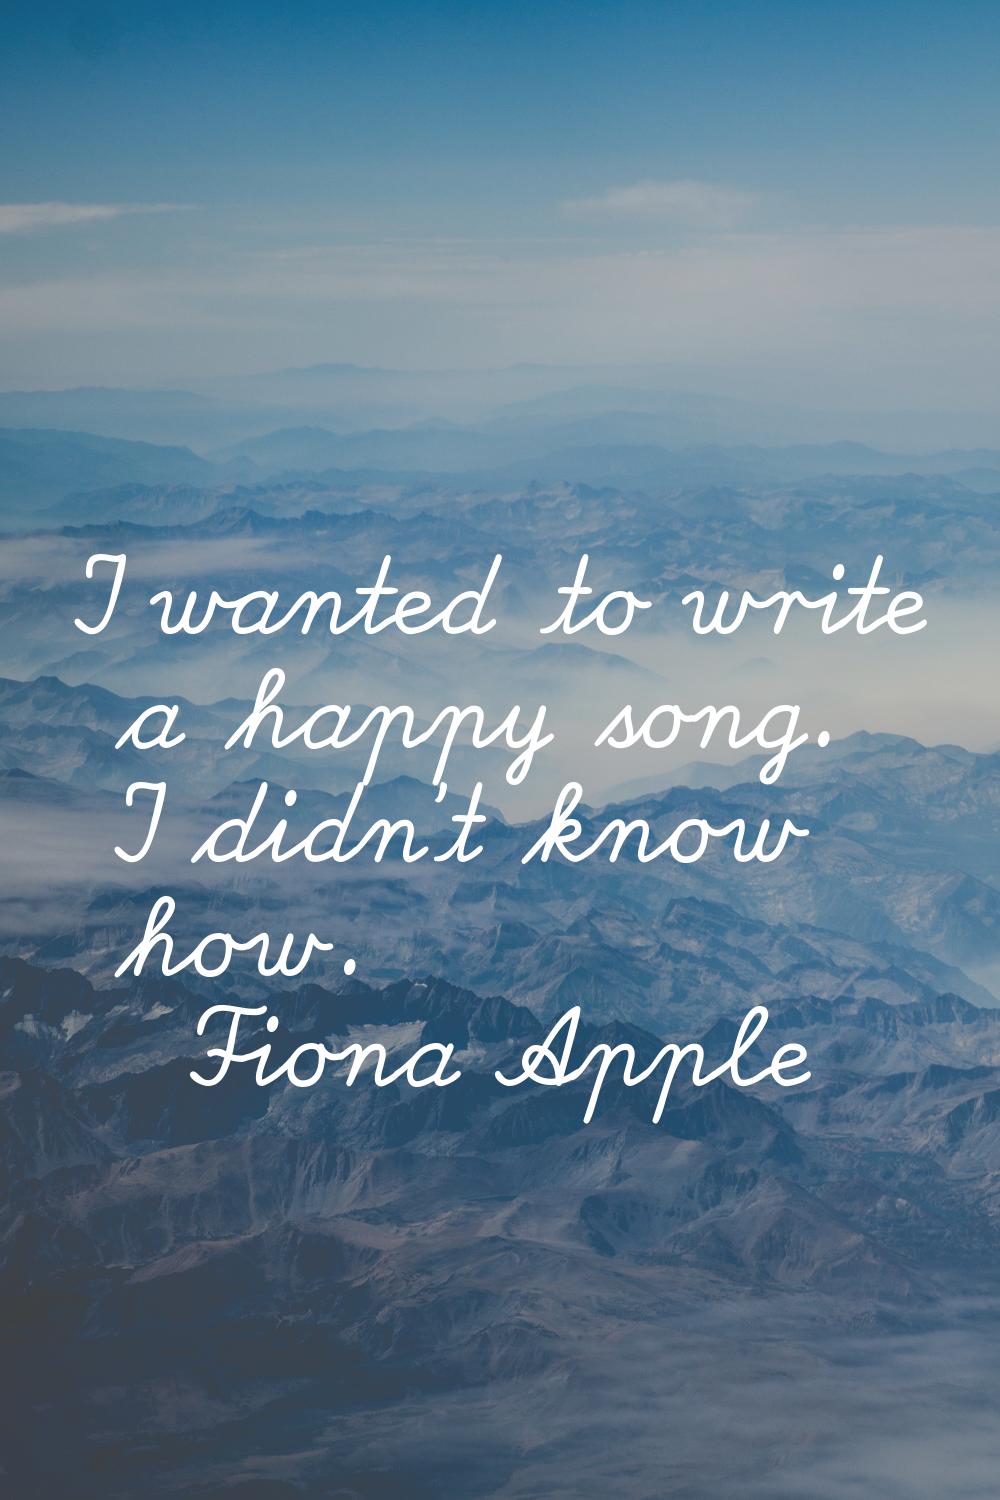 I wanted to write a happy song. I didn't know how.